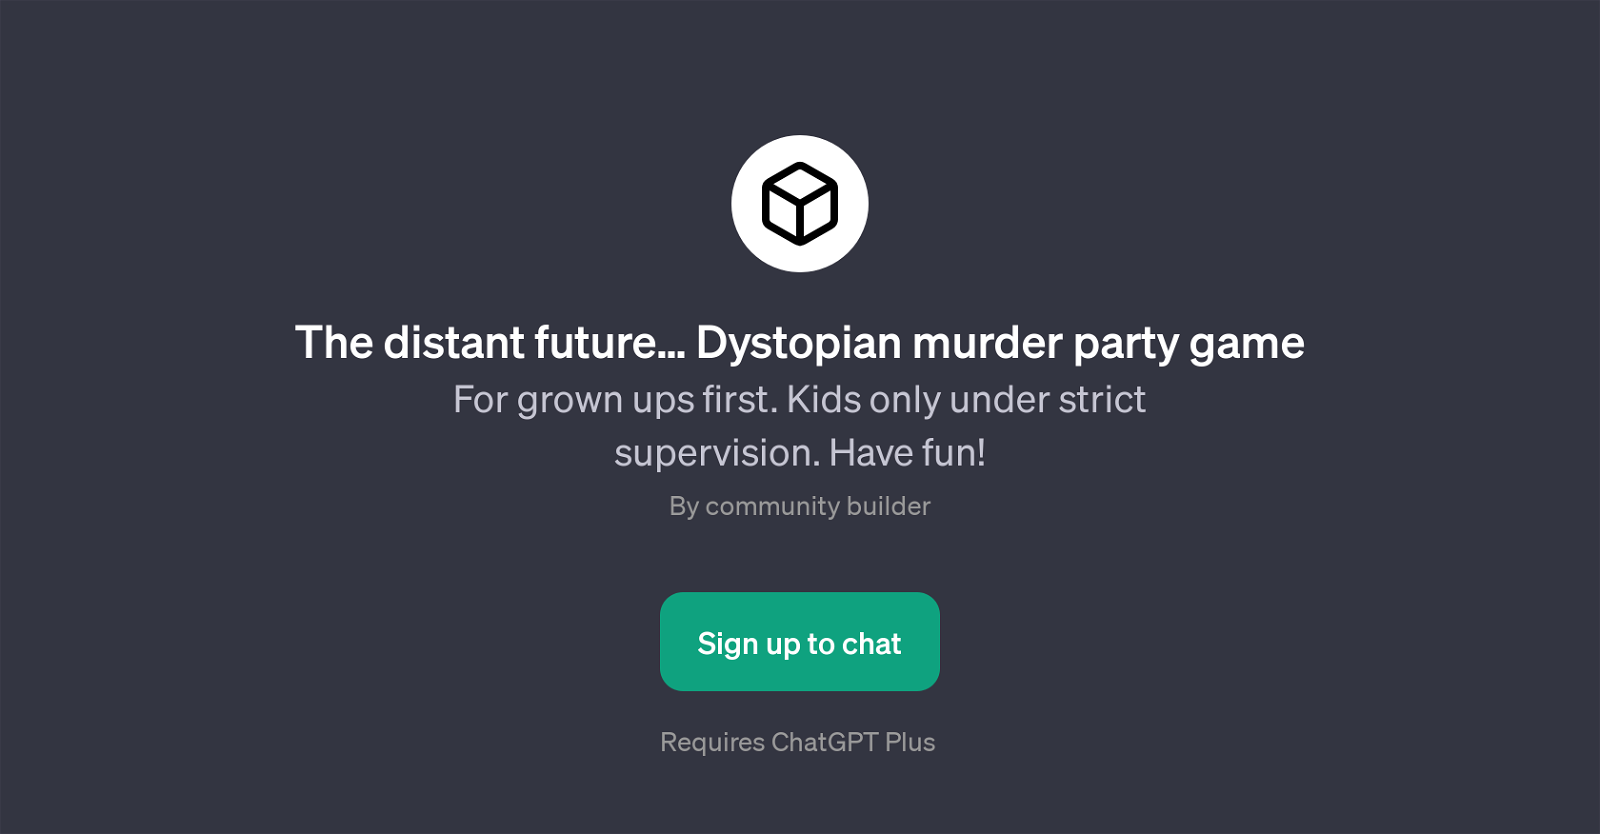 The Distant Future: Dystopian Murder Party Game website